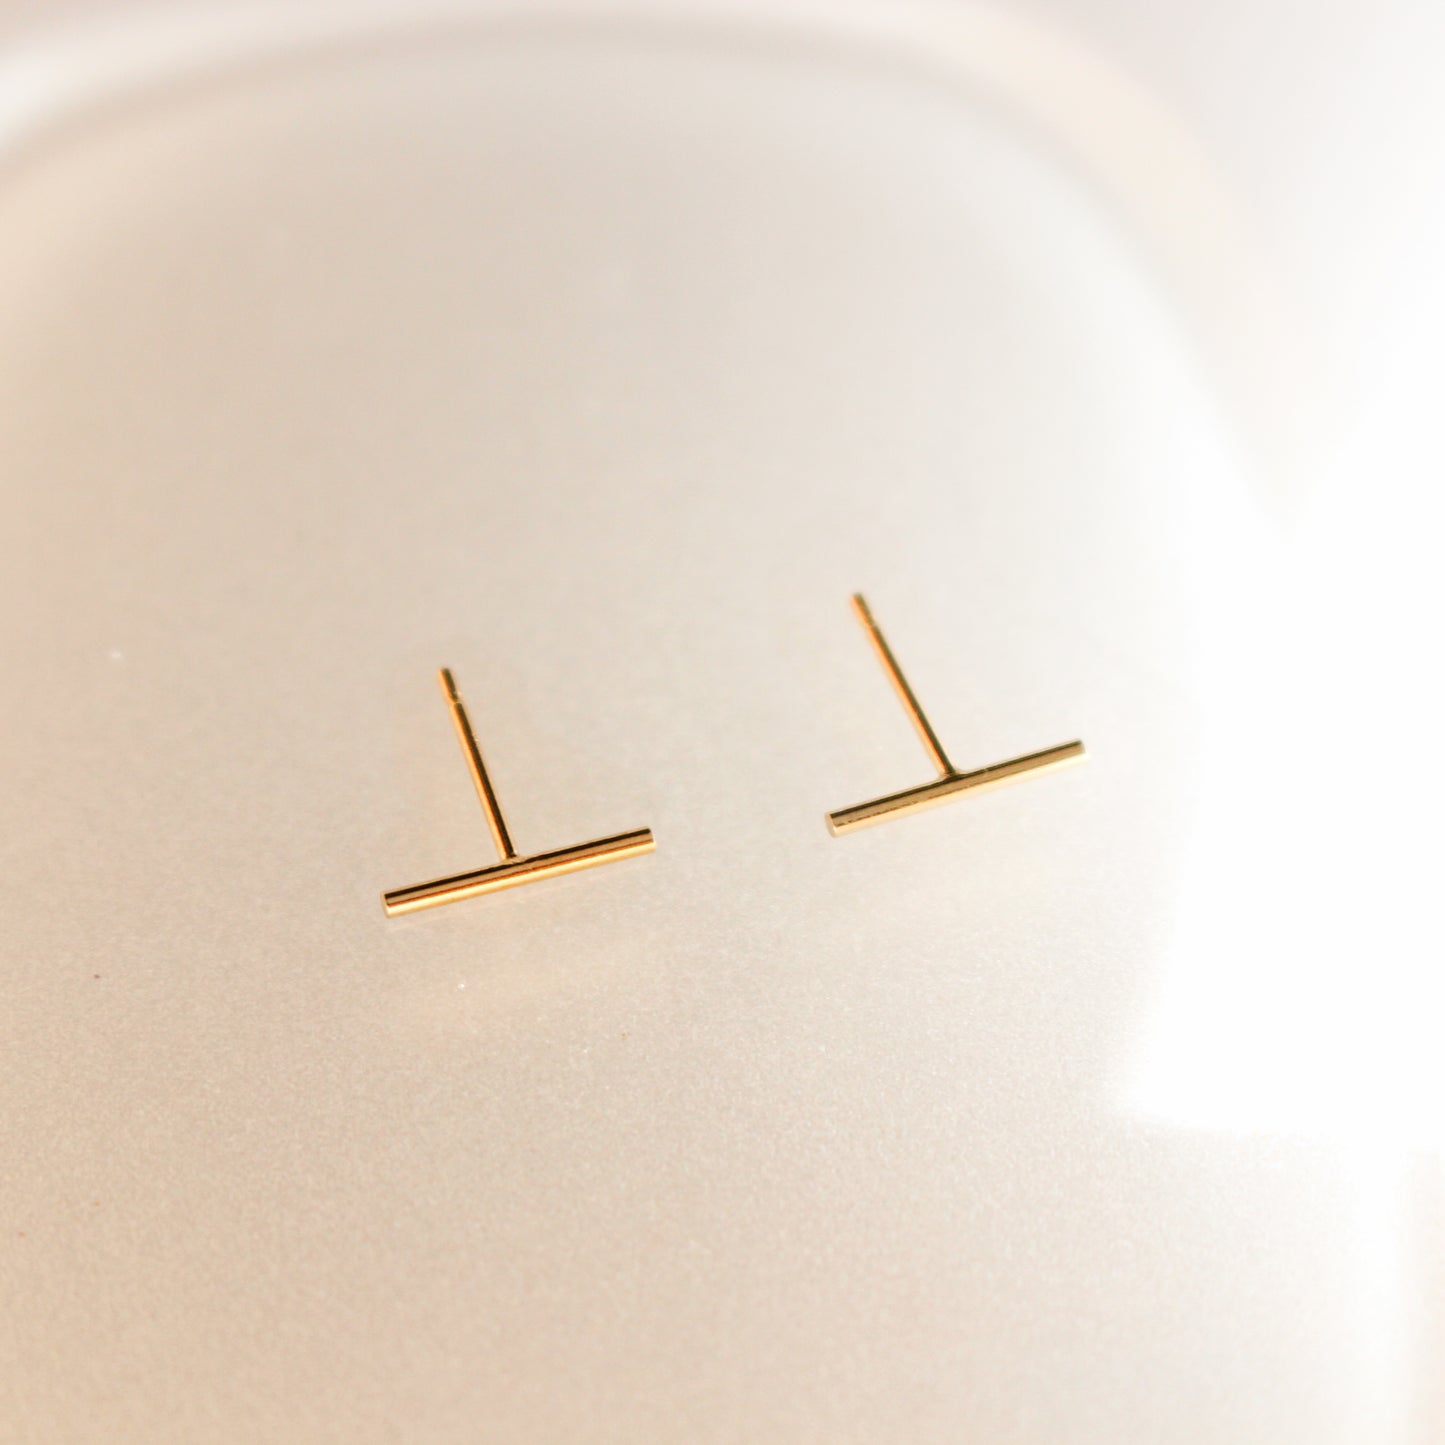 14K Gold filled bar post · Small Bar Earrings · Gift for her · Tiny Line Earrings · Minimalist everyday jewelry